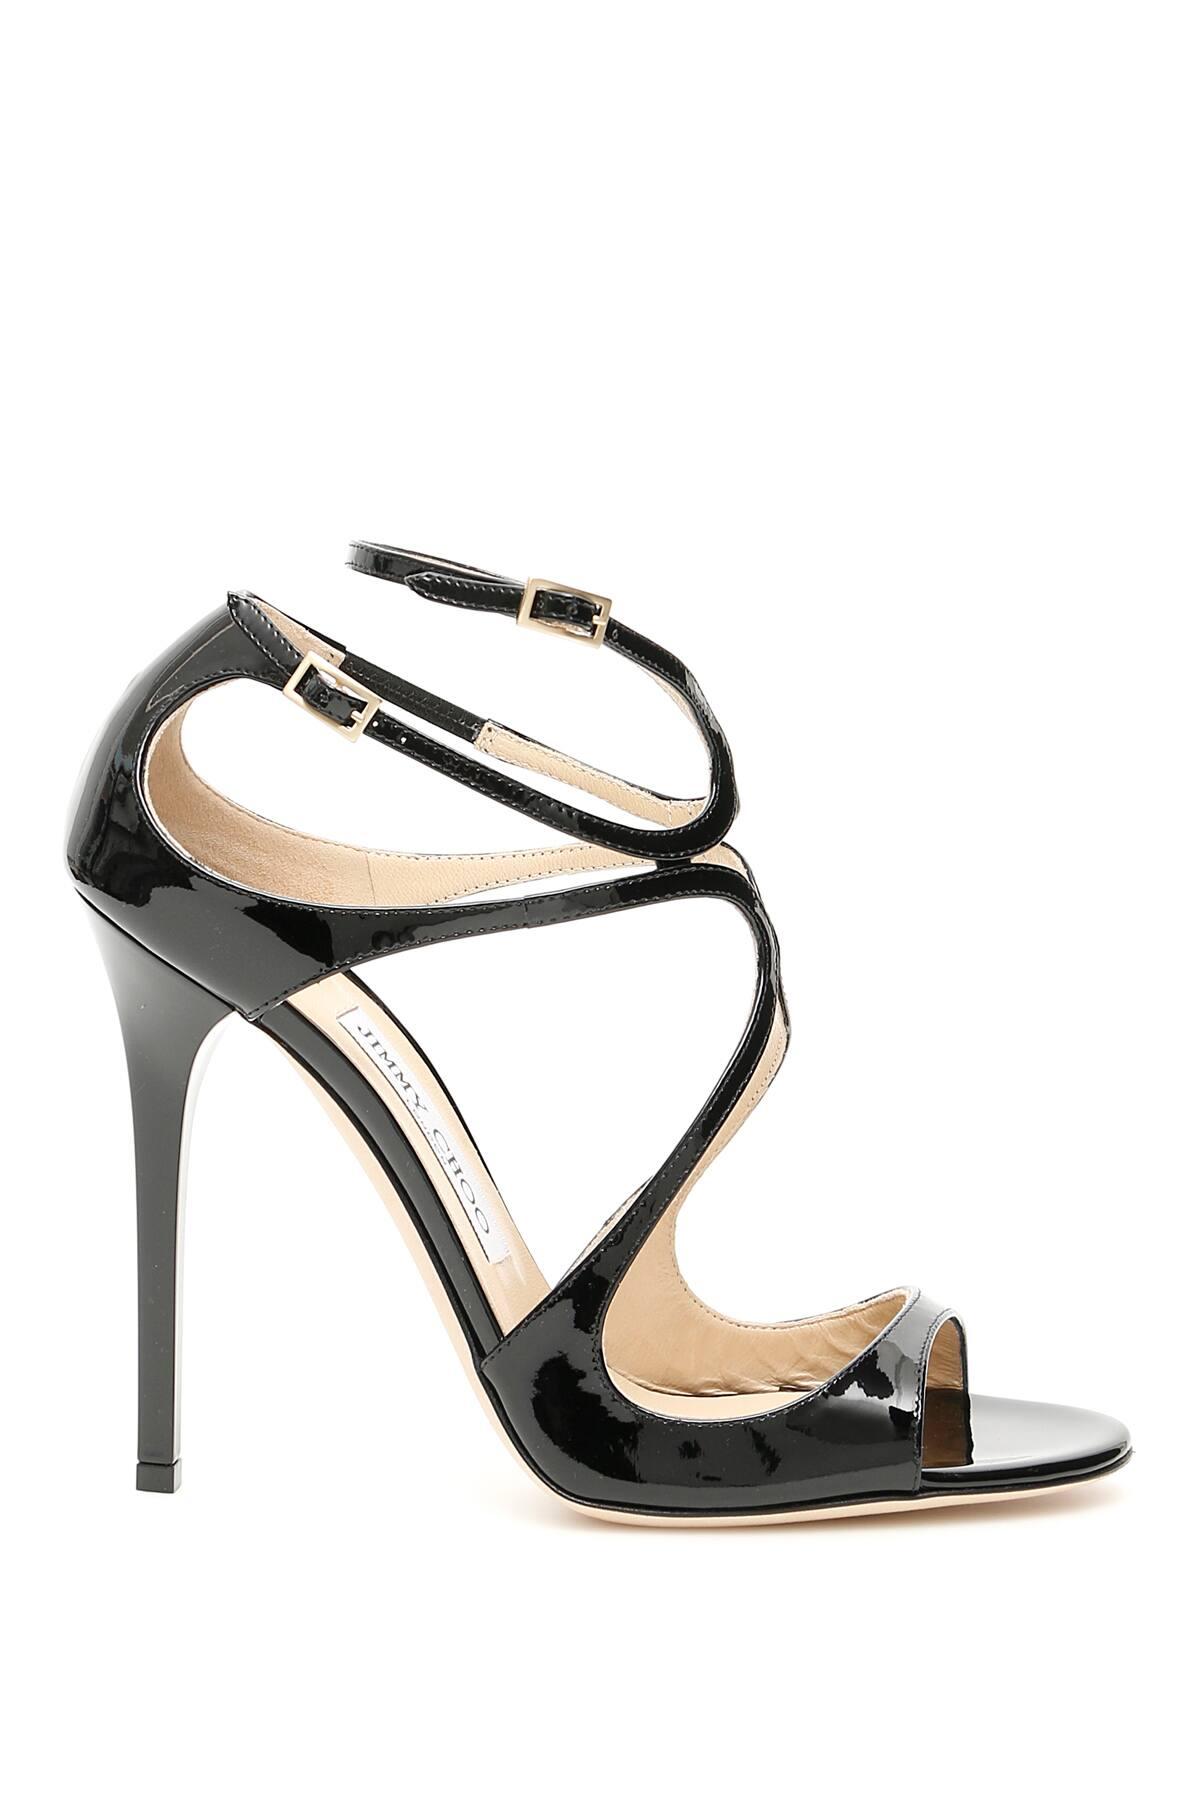 Jimmy Choo Leather Lance Sandals in Black - Save 8% - Lyst